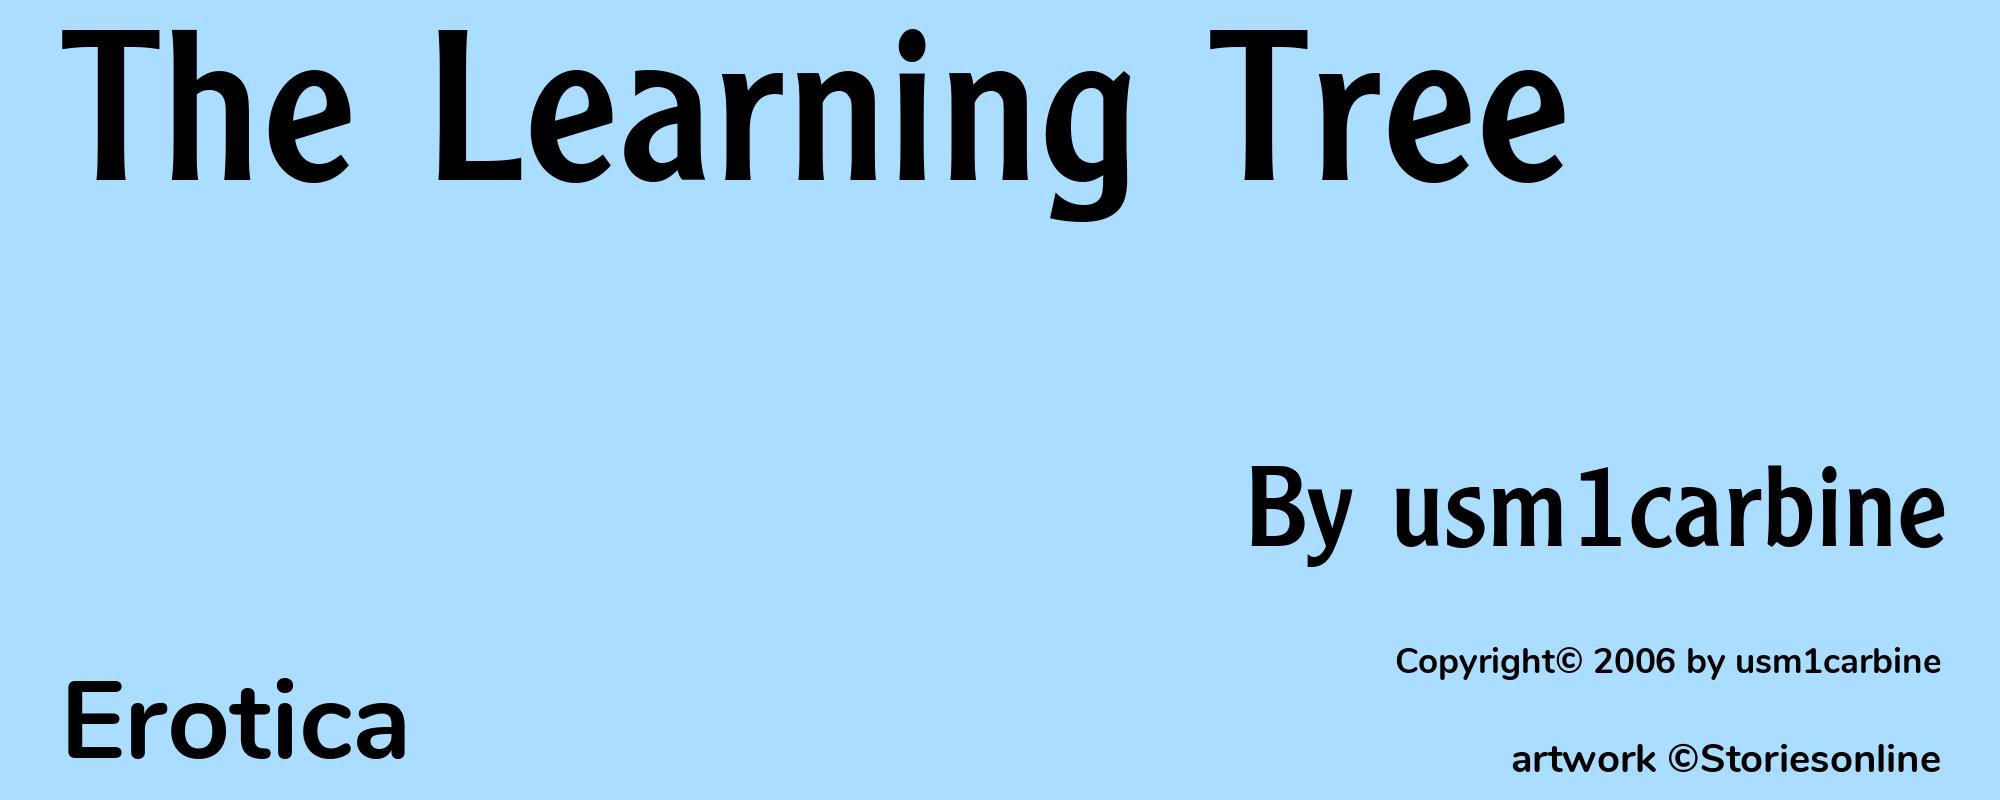 The Learning Tree - Cover